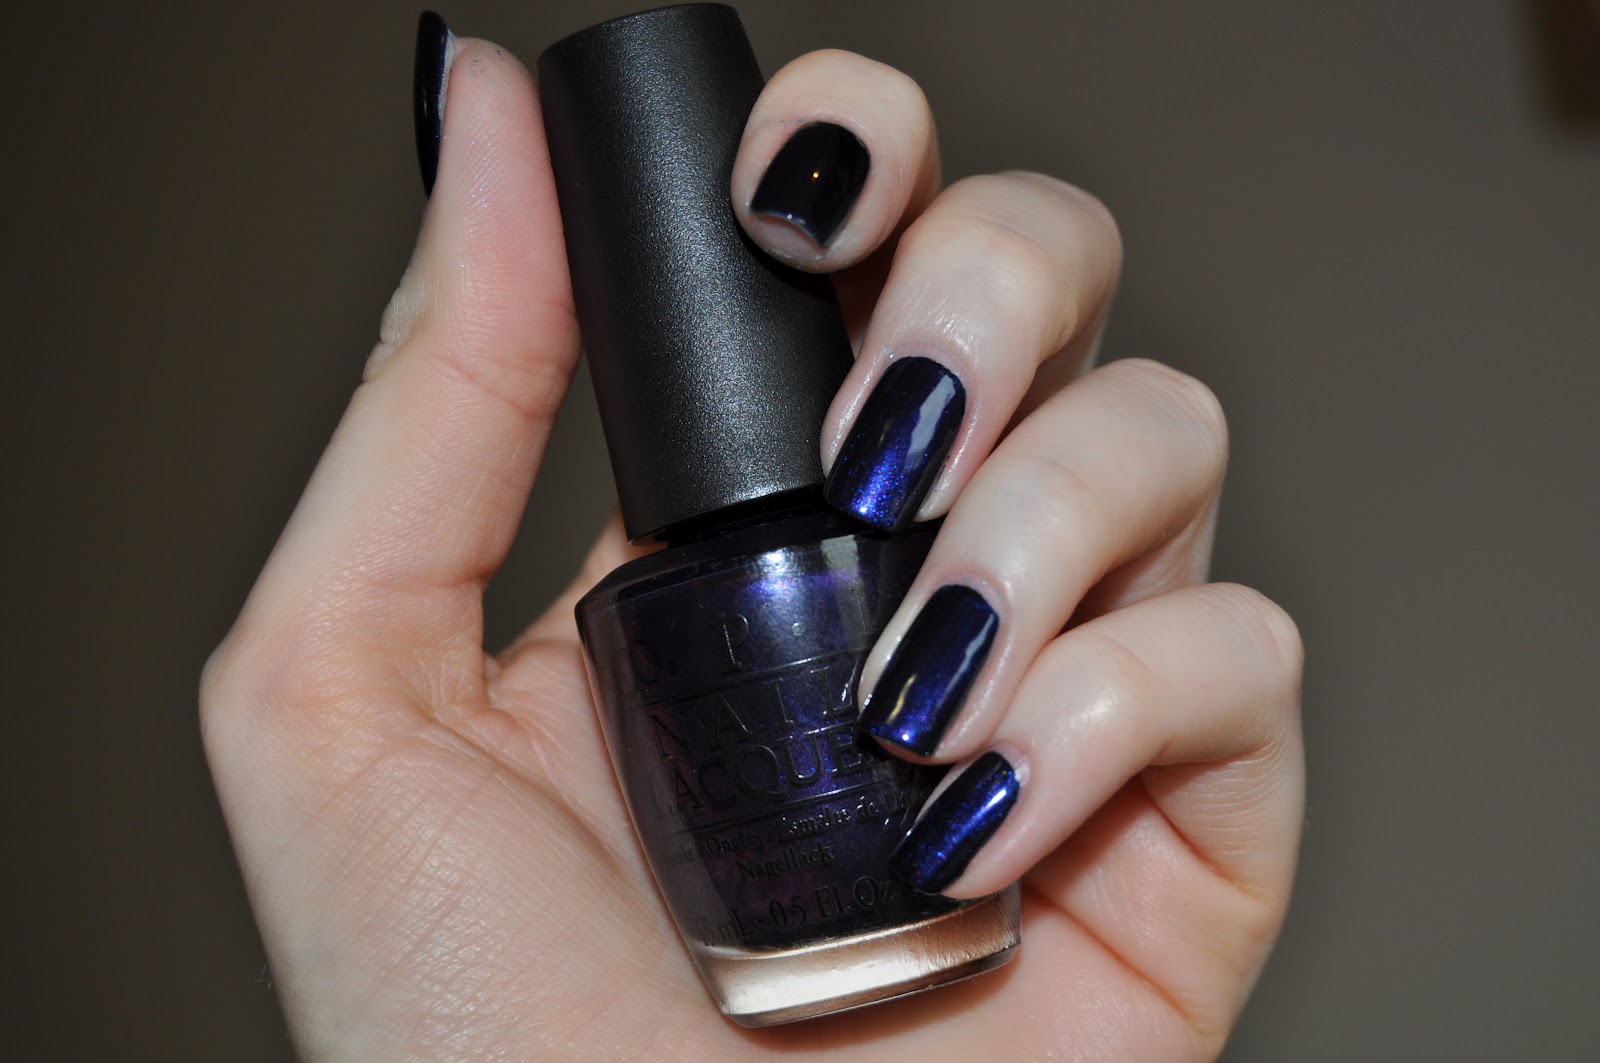 7. OPI "Russian Navy" from the Russian Collection - wide 3